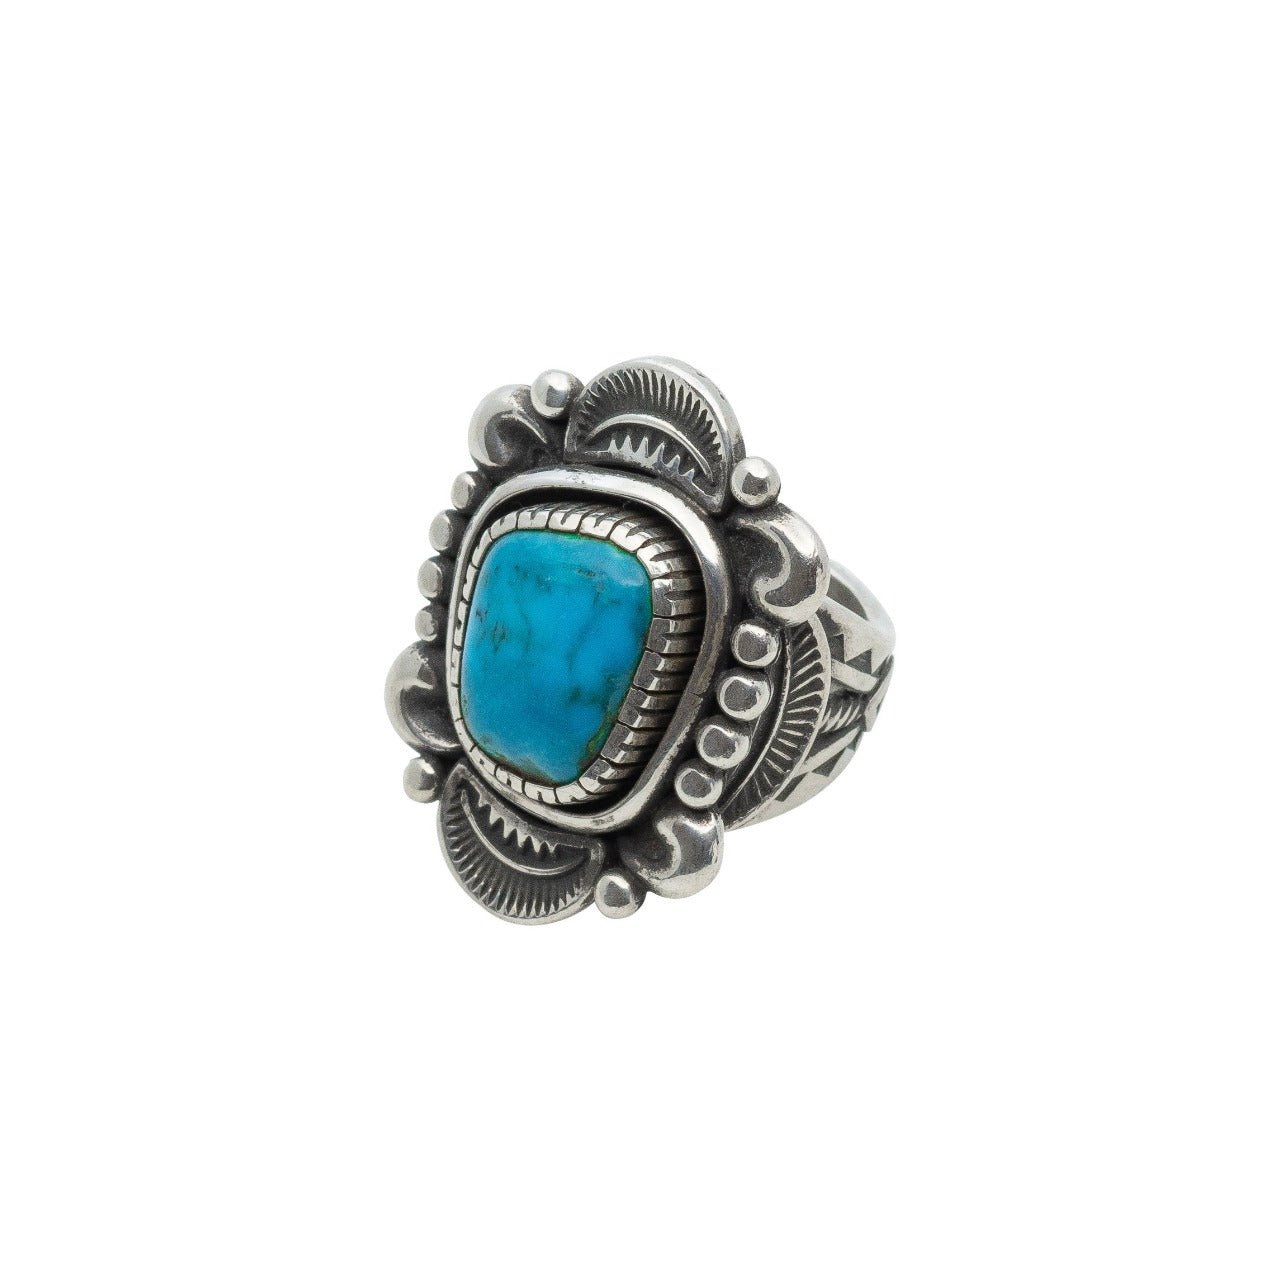 Clendon Pete Ring of Natural Morenci Turquoise - Turquoise & Tufa